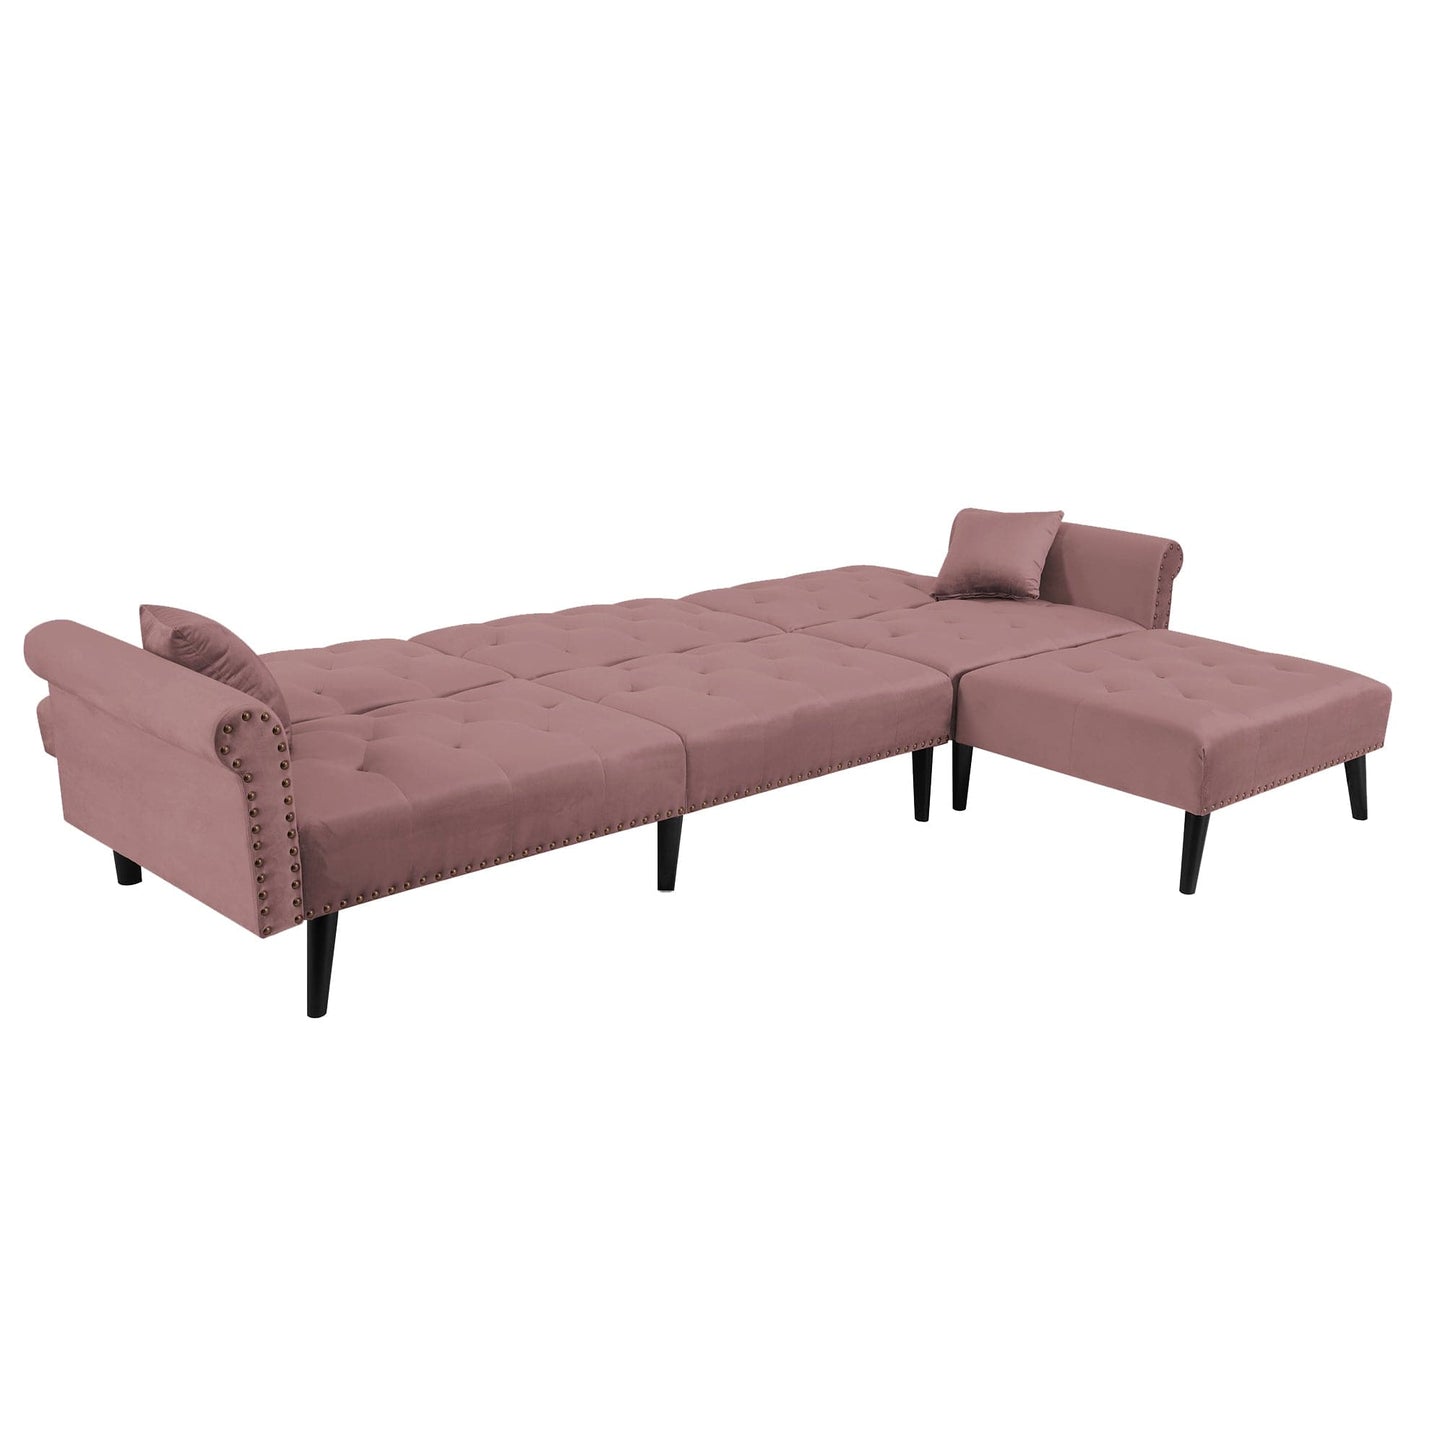 TFC&H Co. Convertible Sofa Bed Sleeper - Velvet Mauve/Pink- Ships from The US - sofa bed sleeper at TFC&H Co.